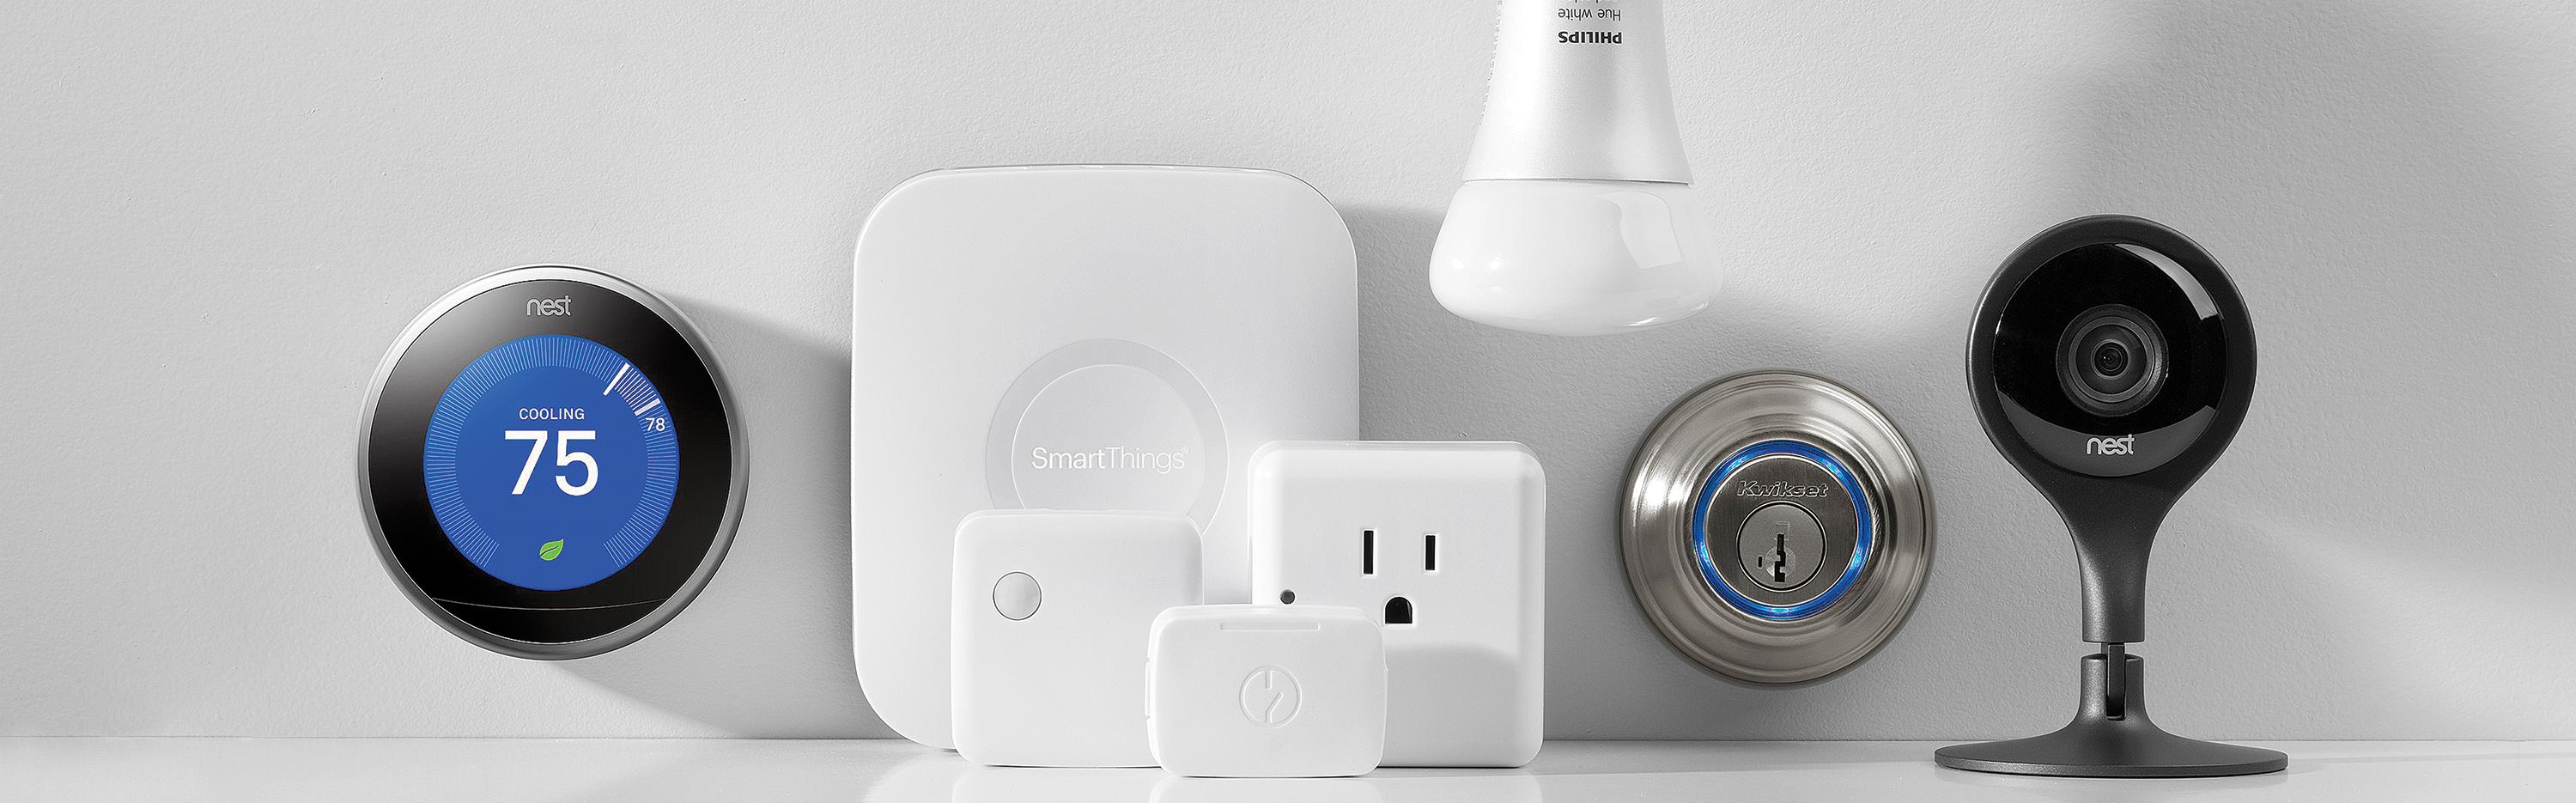 Smart Home products from The Home Depot